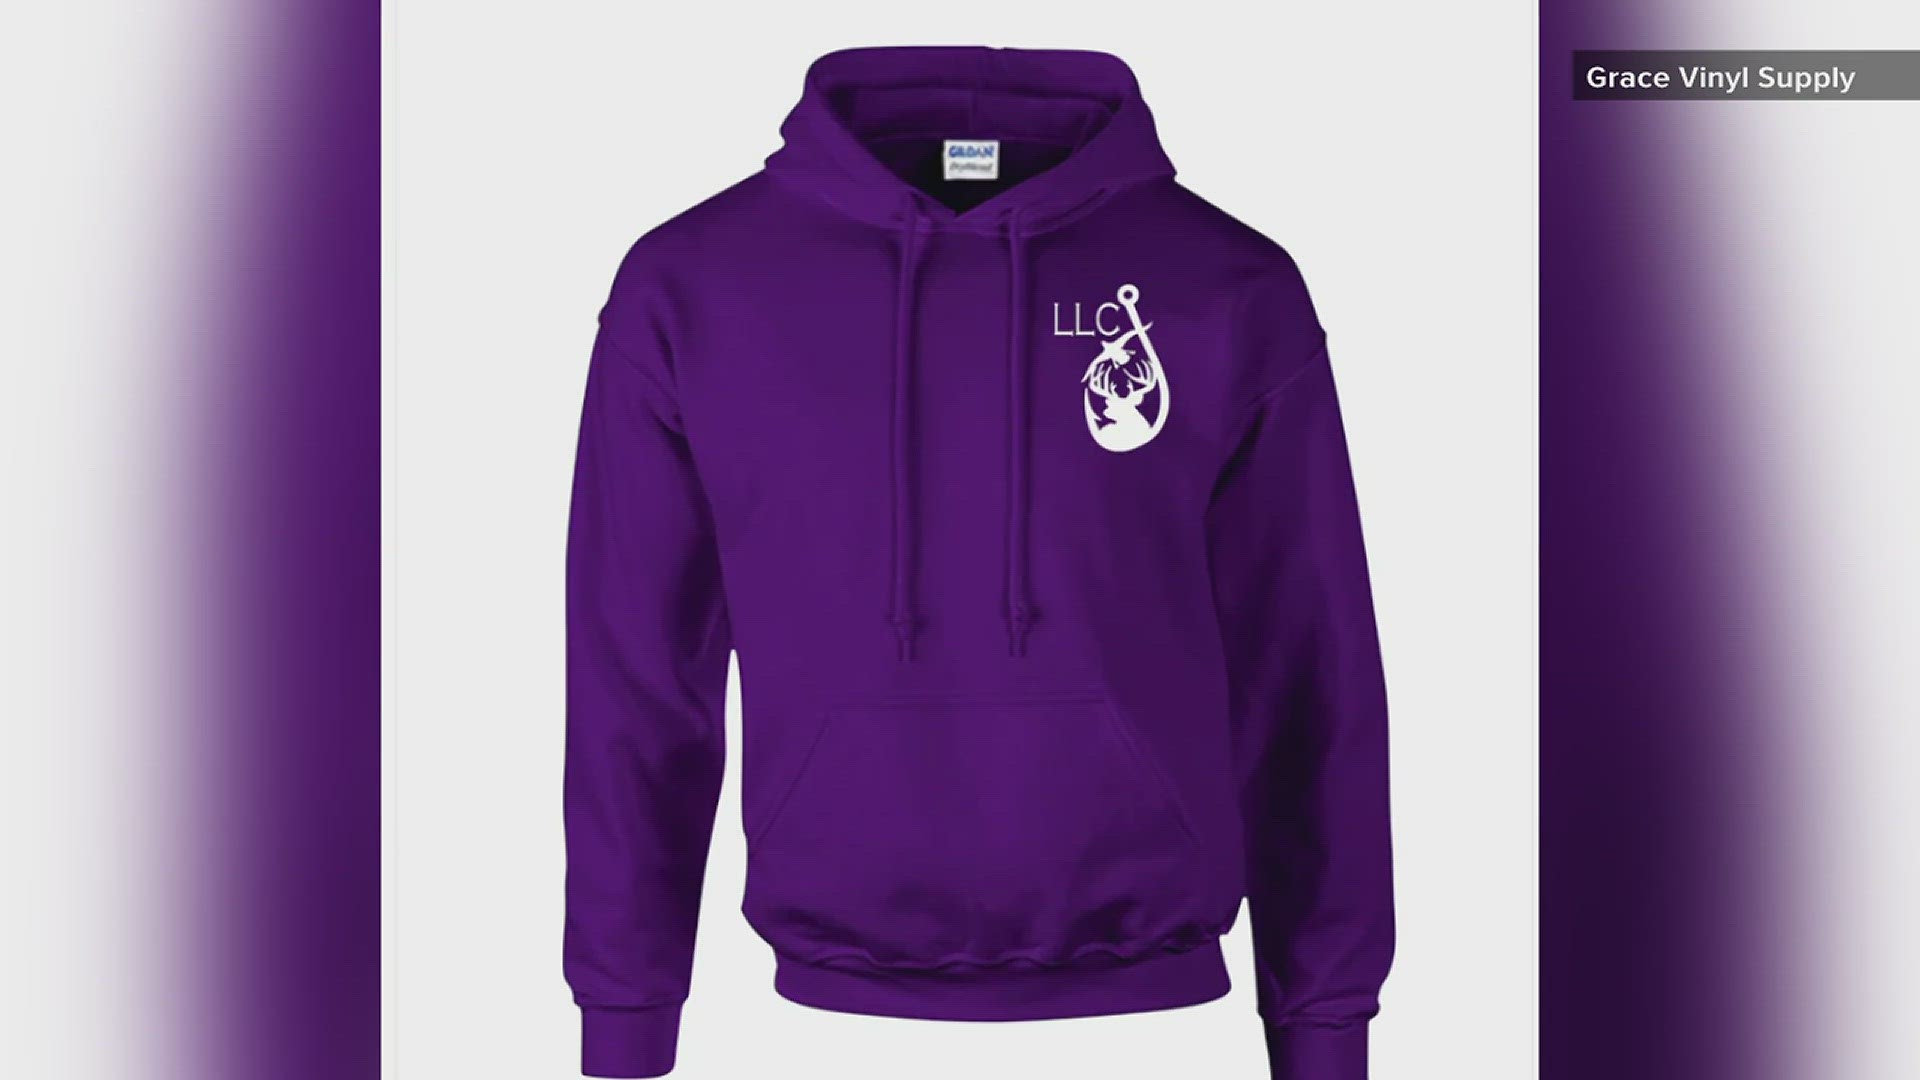 The purple sweatshirt has a fishhook and deer logo, along with the letters LLC, which stands for "long live Conner".